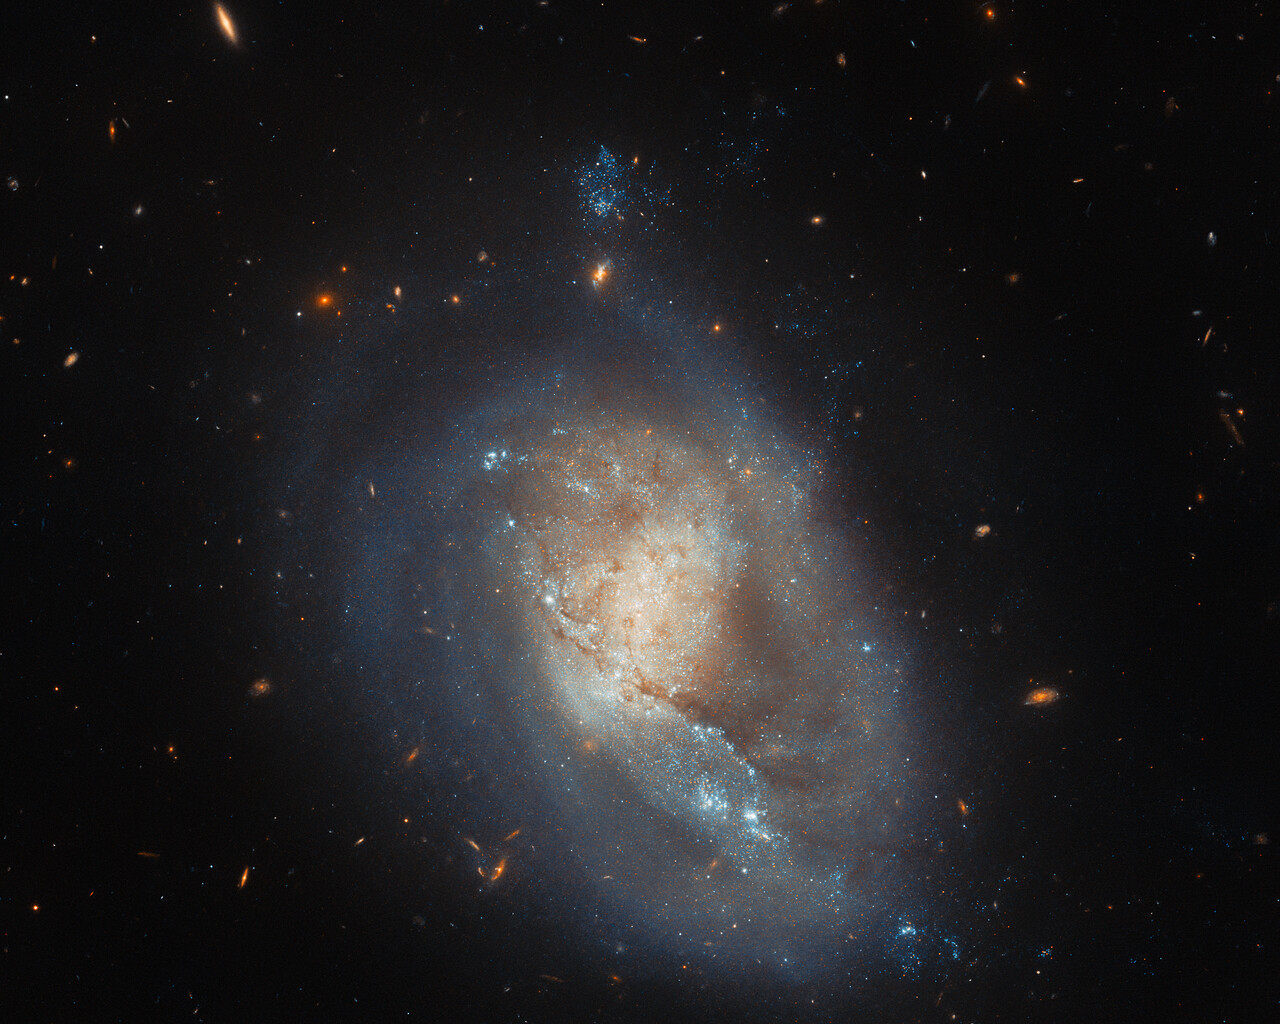 This dwarf galaxy isn't as serene as it might appear in latest Hubble image